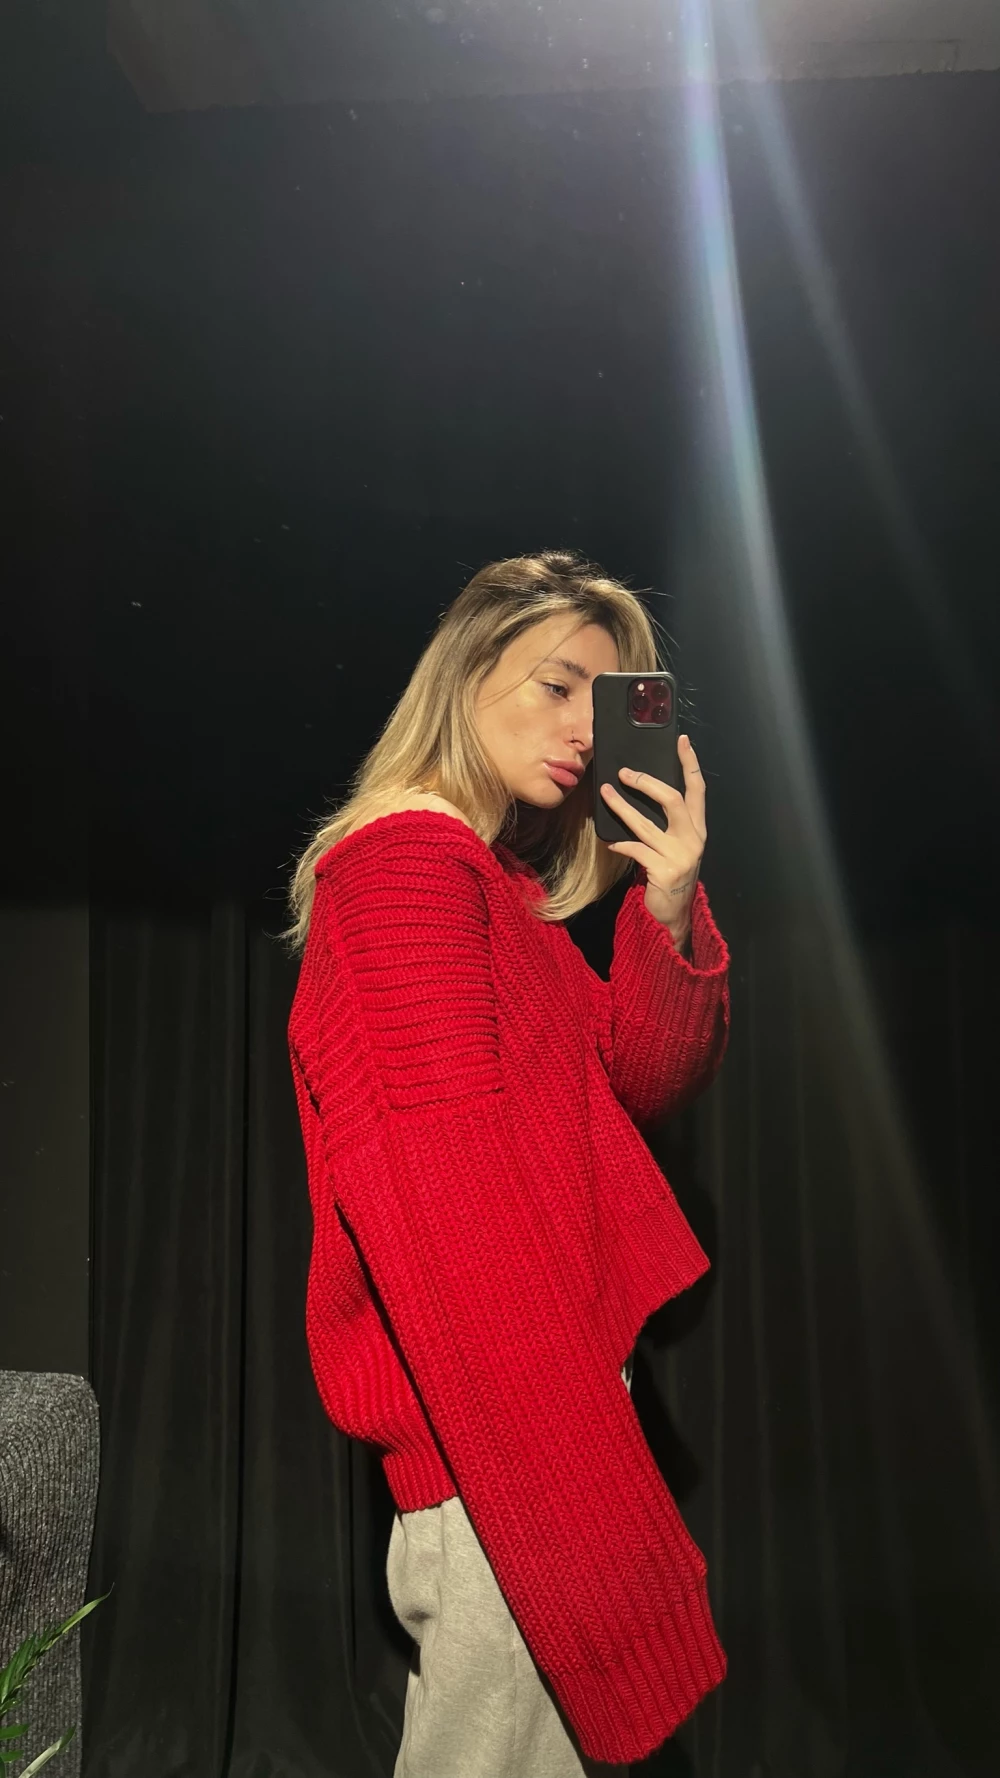 sweater with a deep v-neck sleeve in dark red